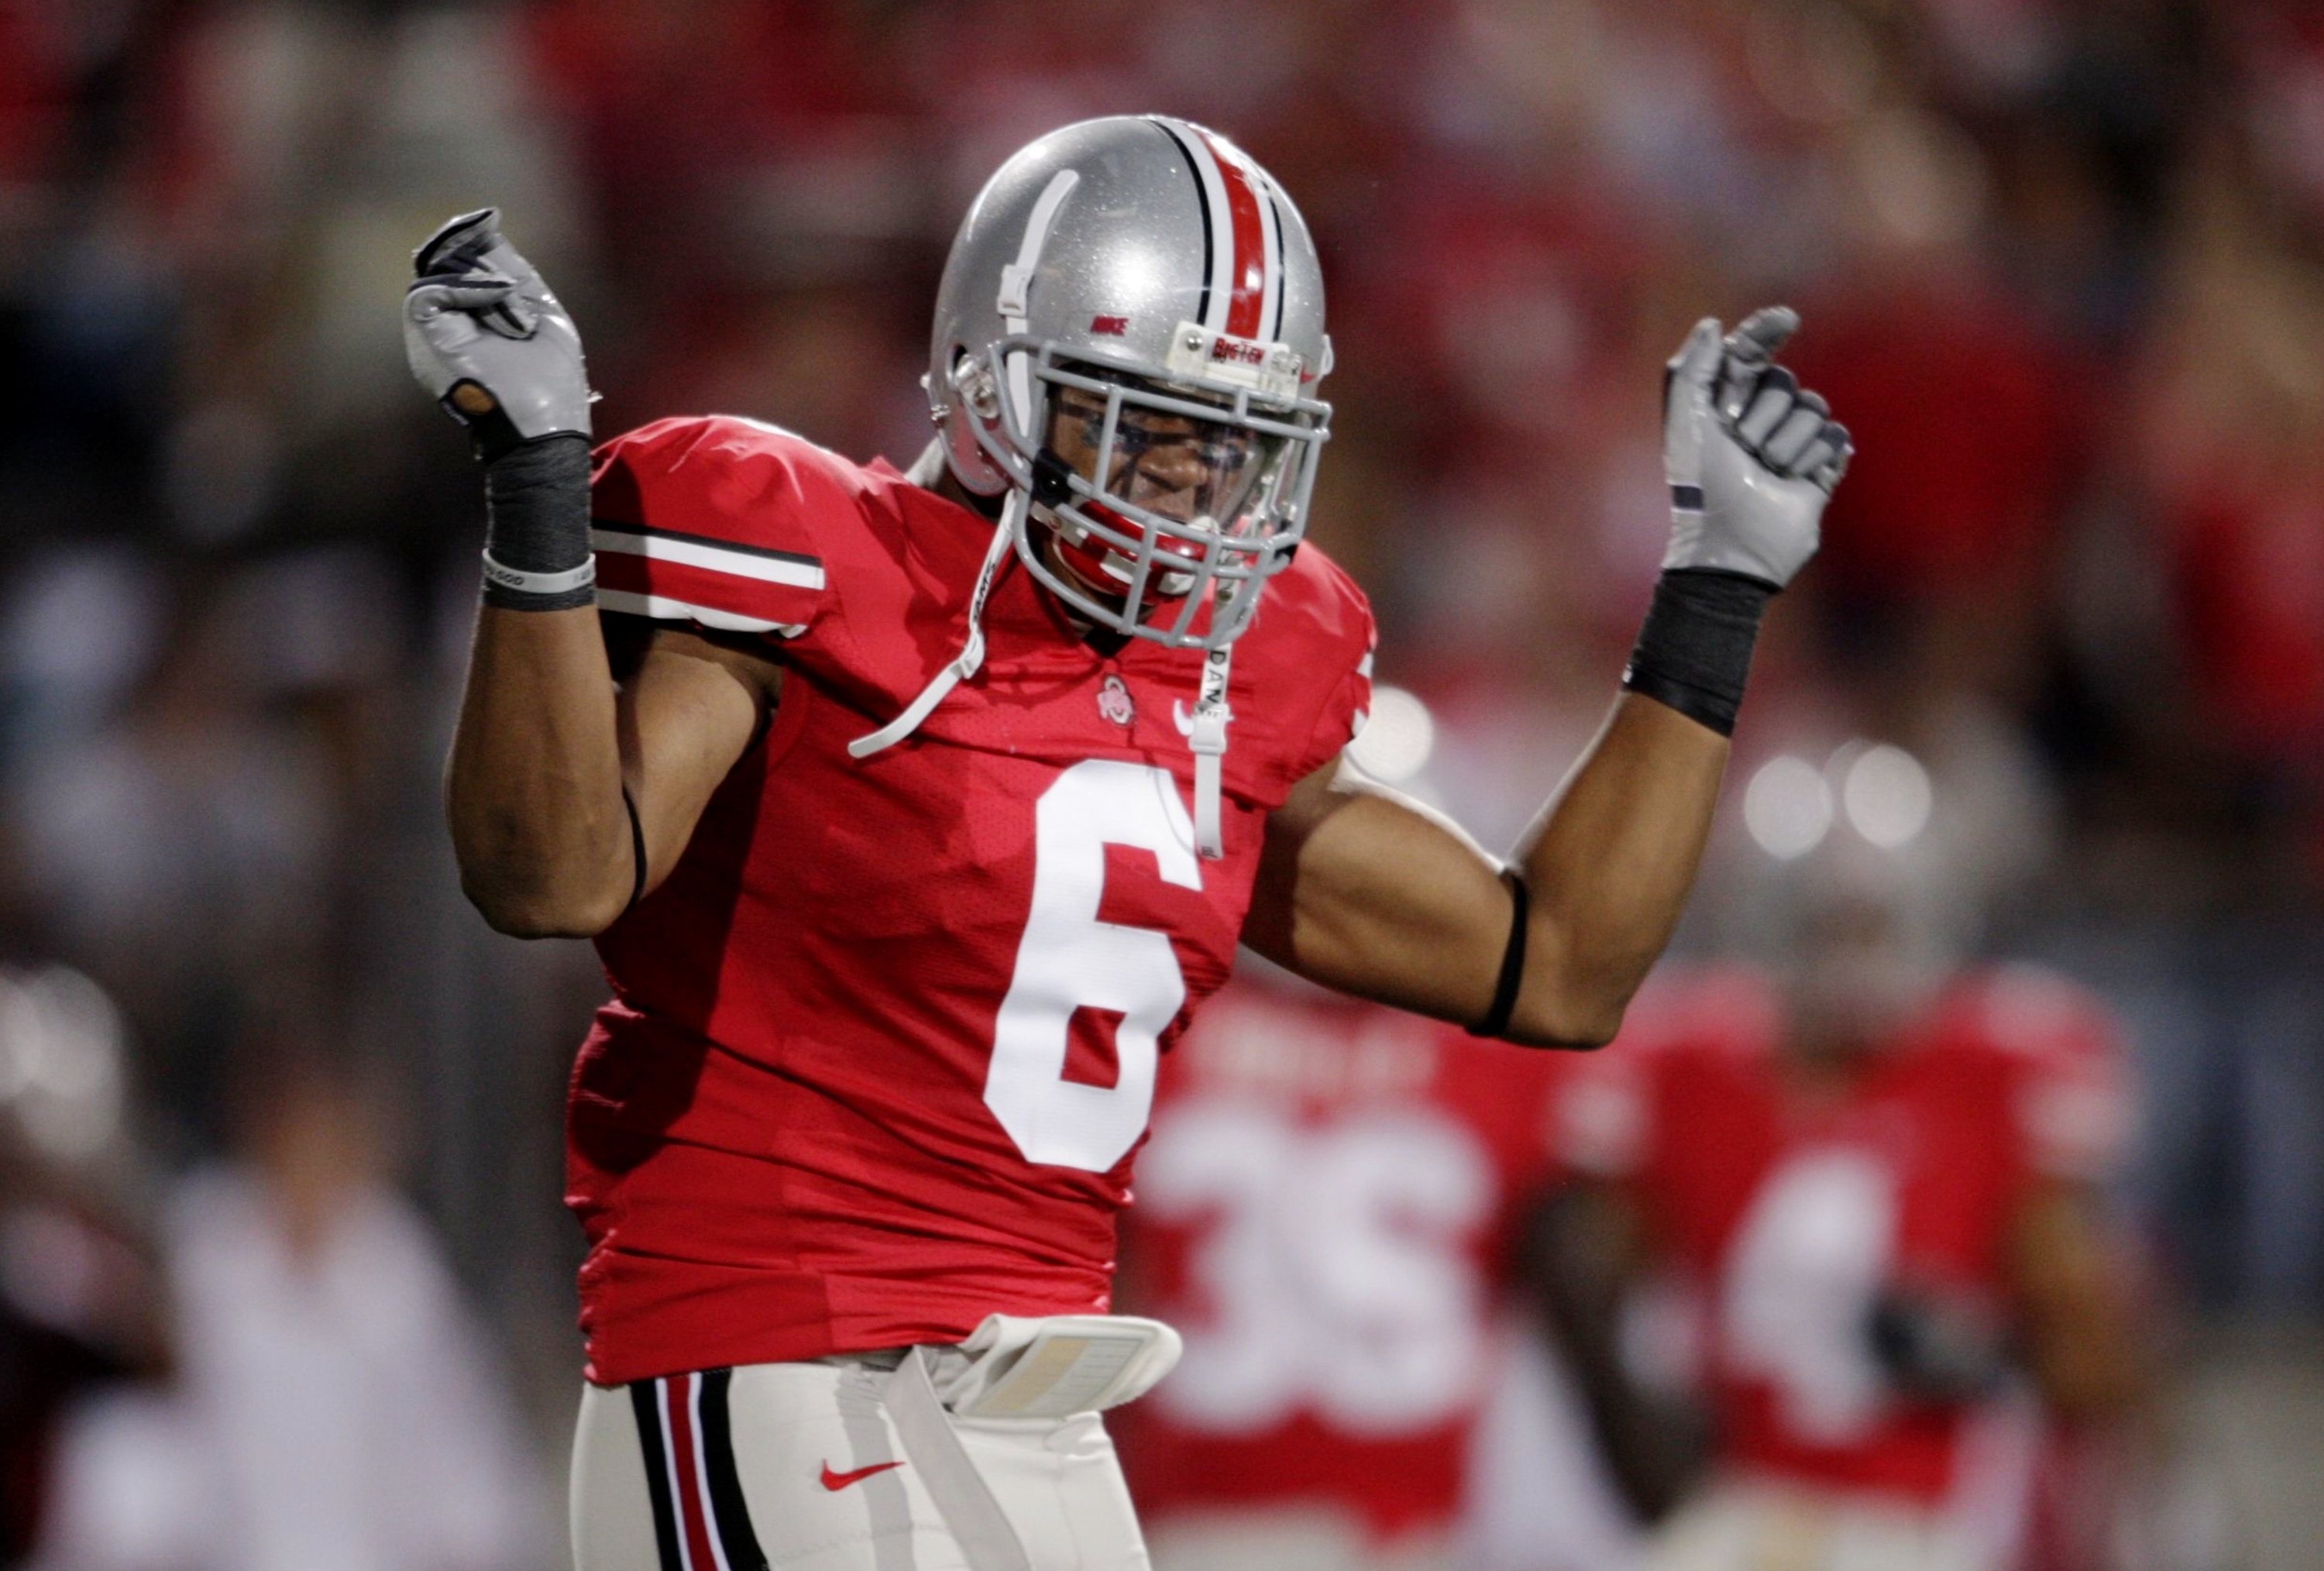 COLUMBUS, OH - SEPTEMBER 12:  Linebacker Etienne Sabino #6 of the Ohio State Buckeyes celebrates after stopping C.J. Gable #2 of the USC Trojans (not pictured) during the first quarter of the game at Ohio Stadium on September 12, 2009 in Columbus, Ohio. (